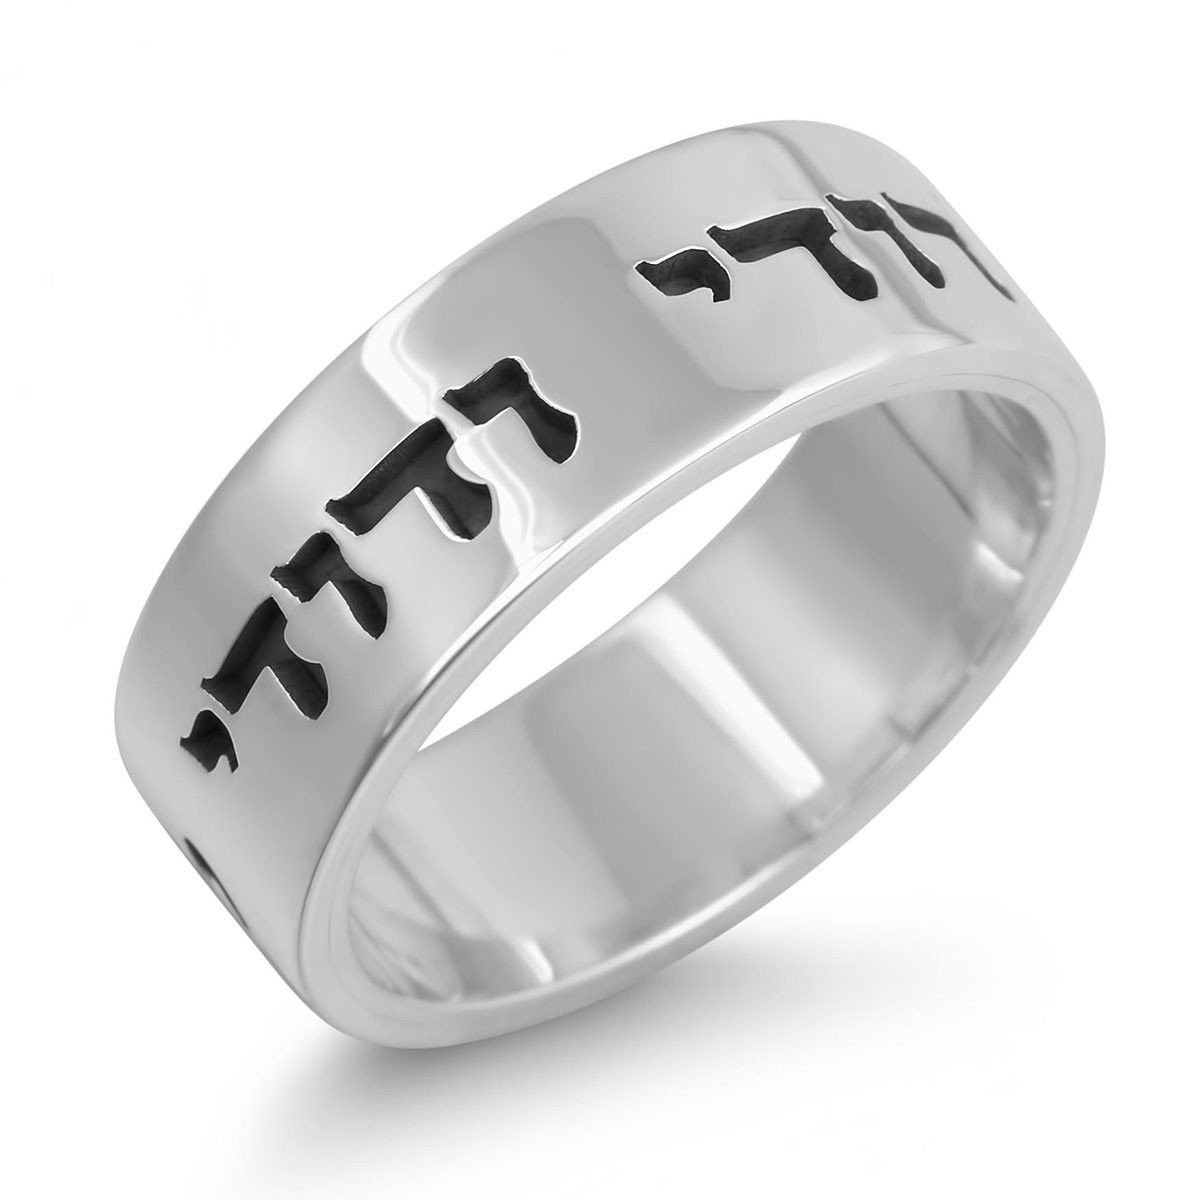 Buy 22k Gold Star of David Oval Ring, Israel Jewelry, Jewish Rings for Men,  Judaica Gift, Online in India - Etsy